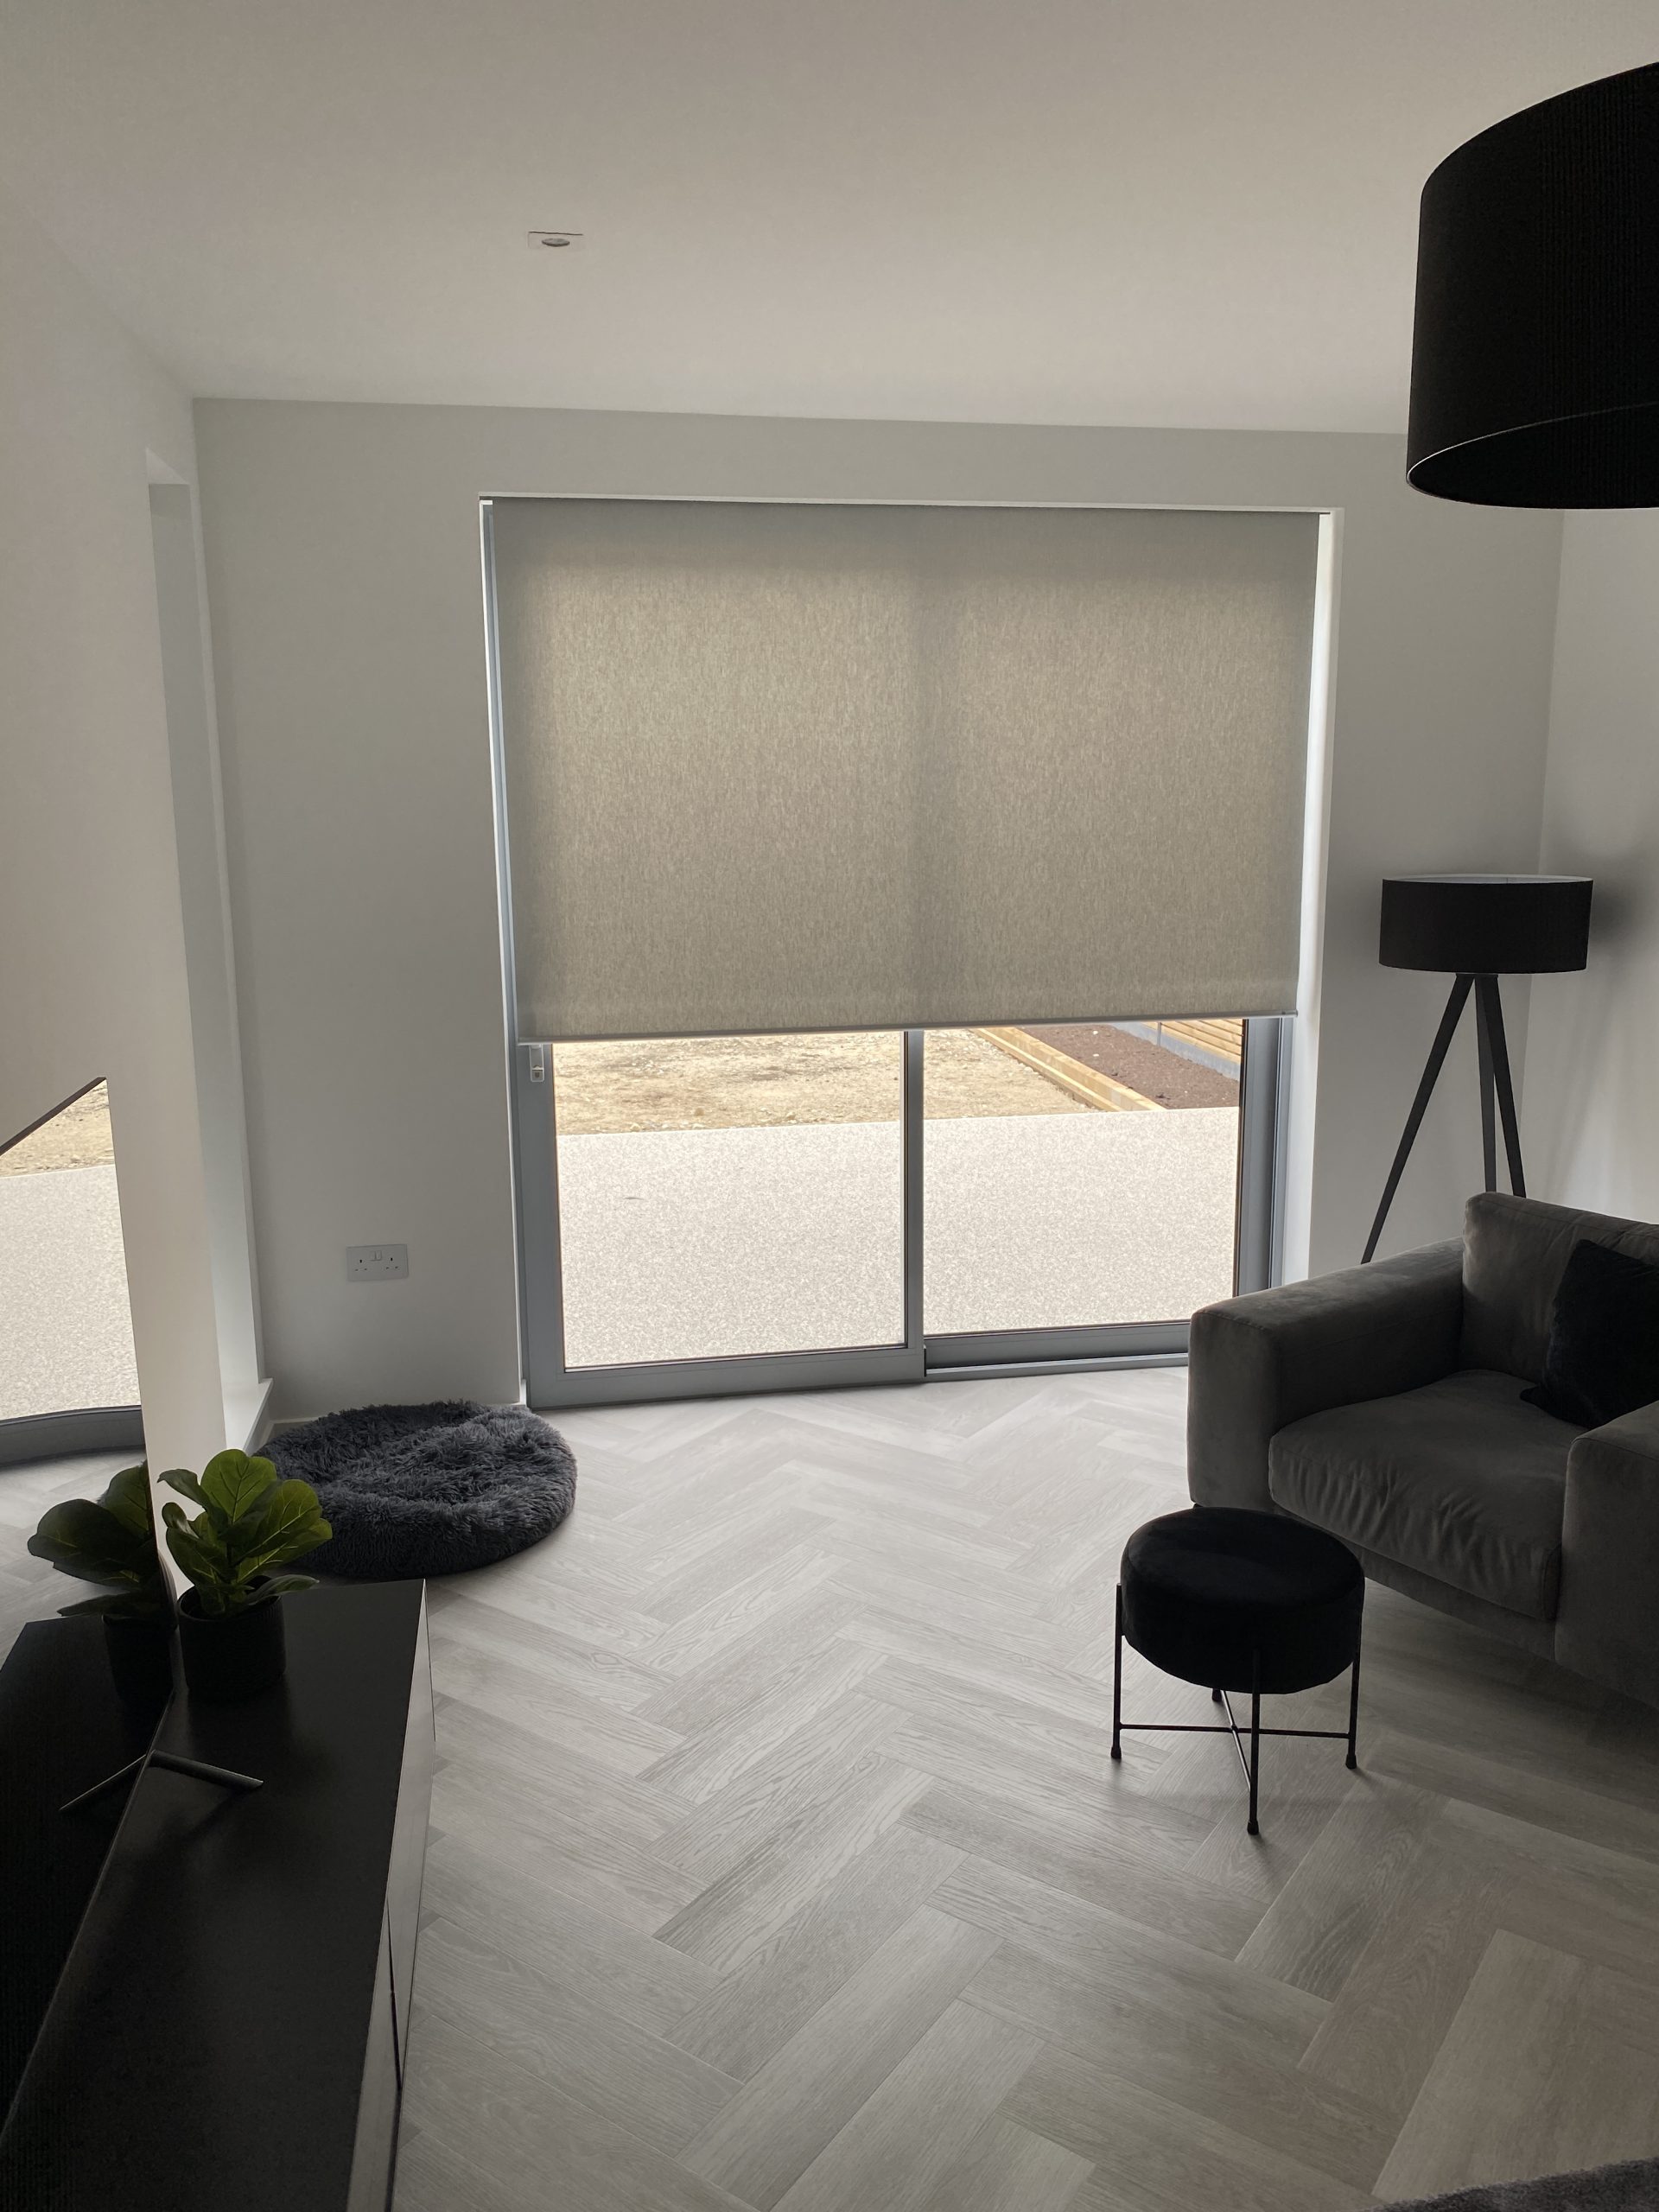 Made to Measure Roller Blinds from Elite Blinds and Shutters Ltd